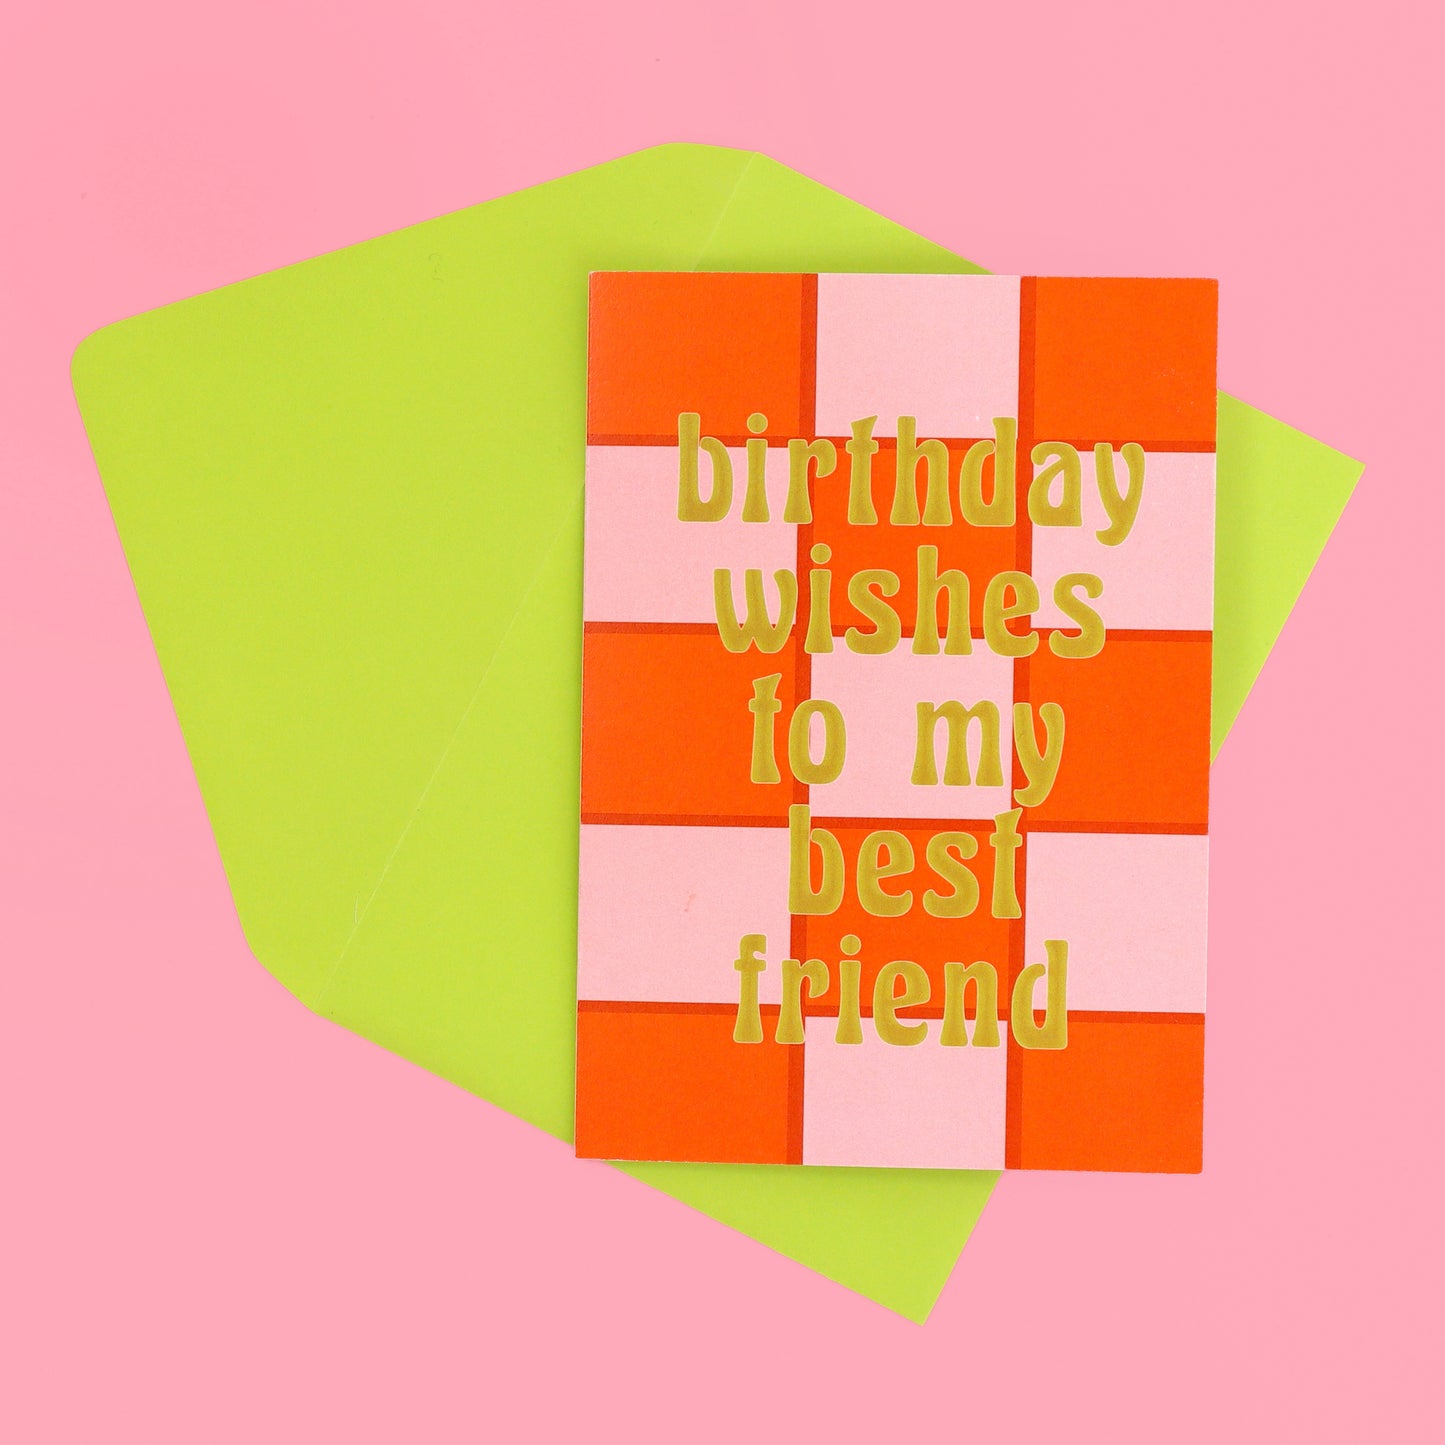 A6 Birthday Wishes to my Best Friend Card